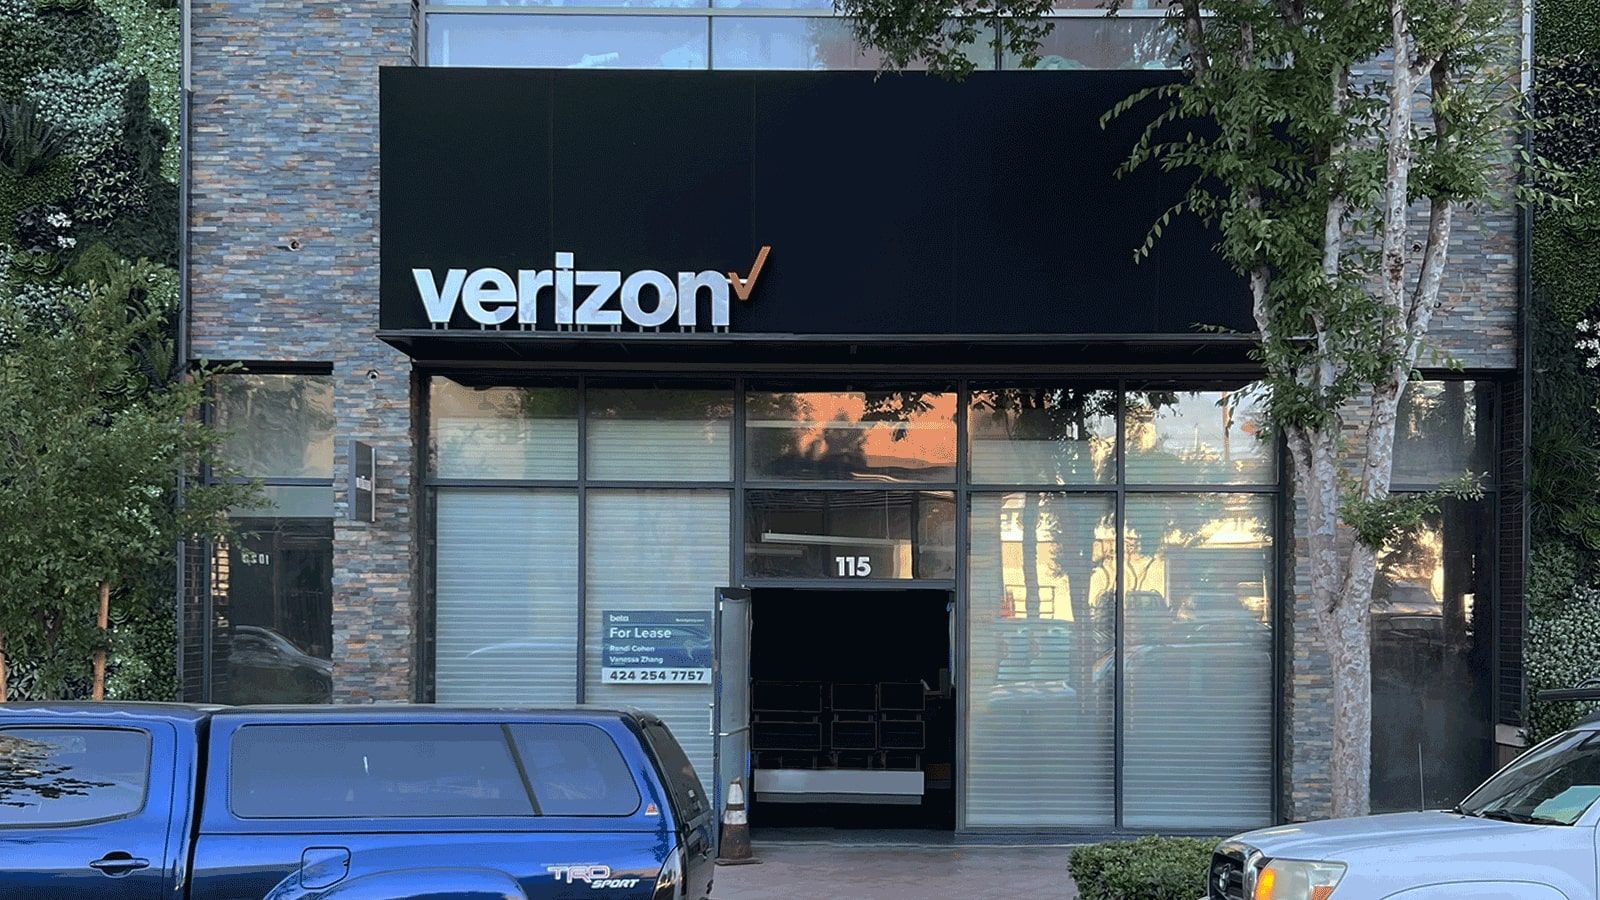 Verizon channel letters mounted on the storefront